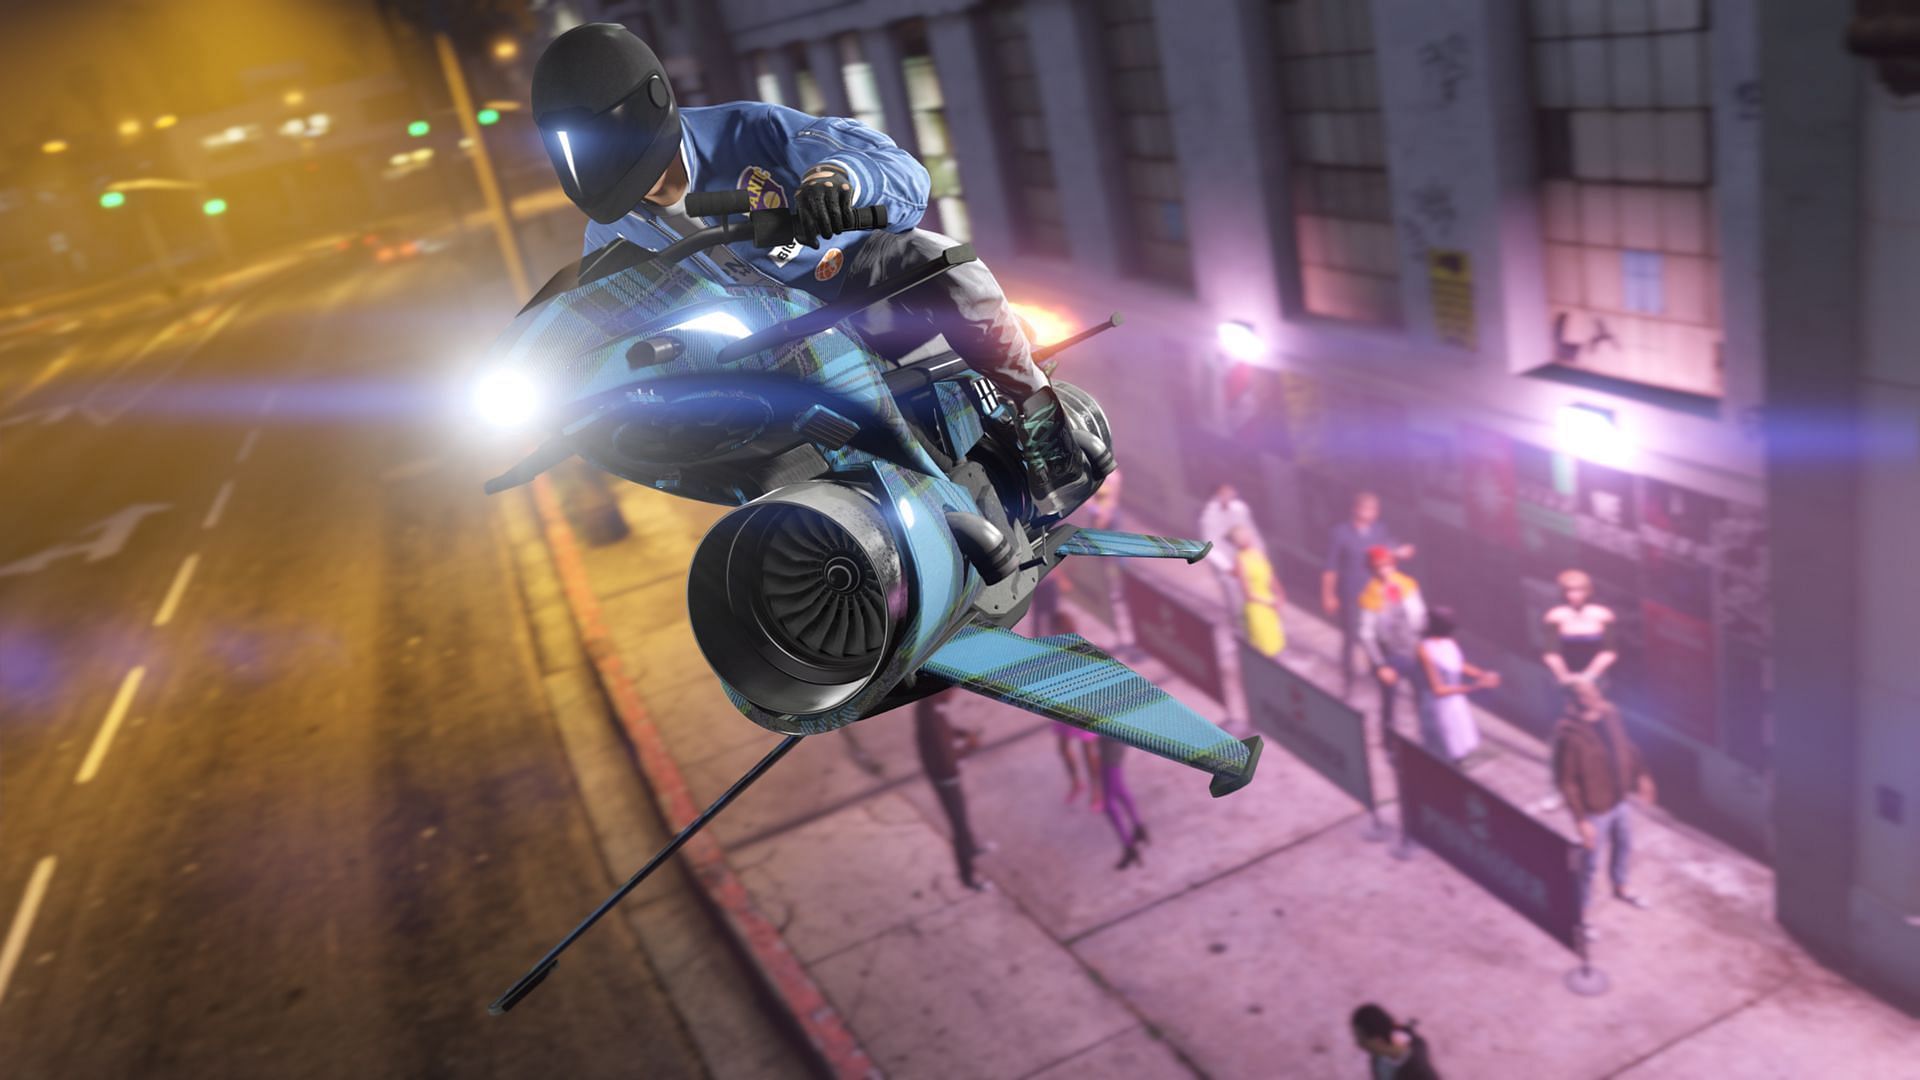 This flying motorcycle just became one of the most expensive vehicles in GTA Online (Image via Wallpaper Cave)